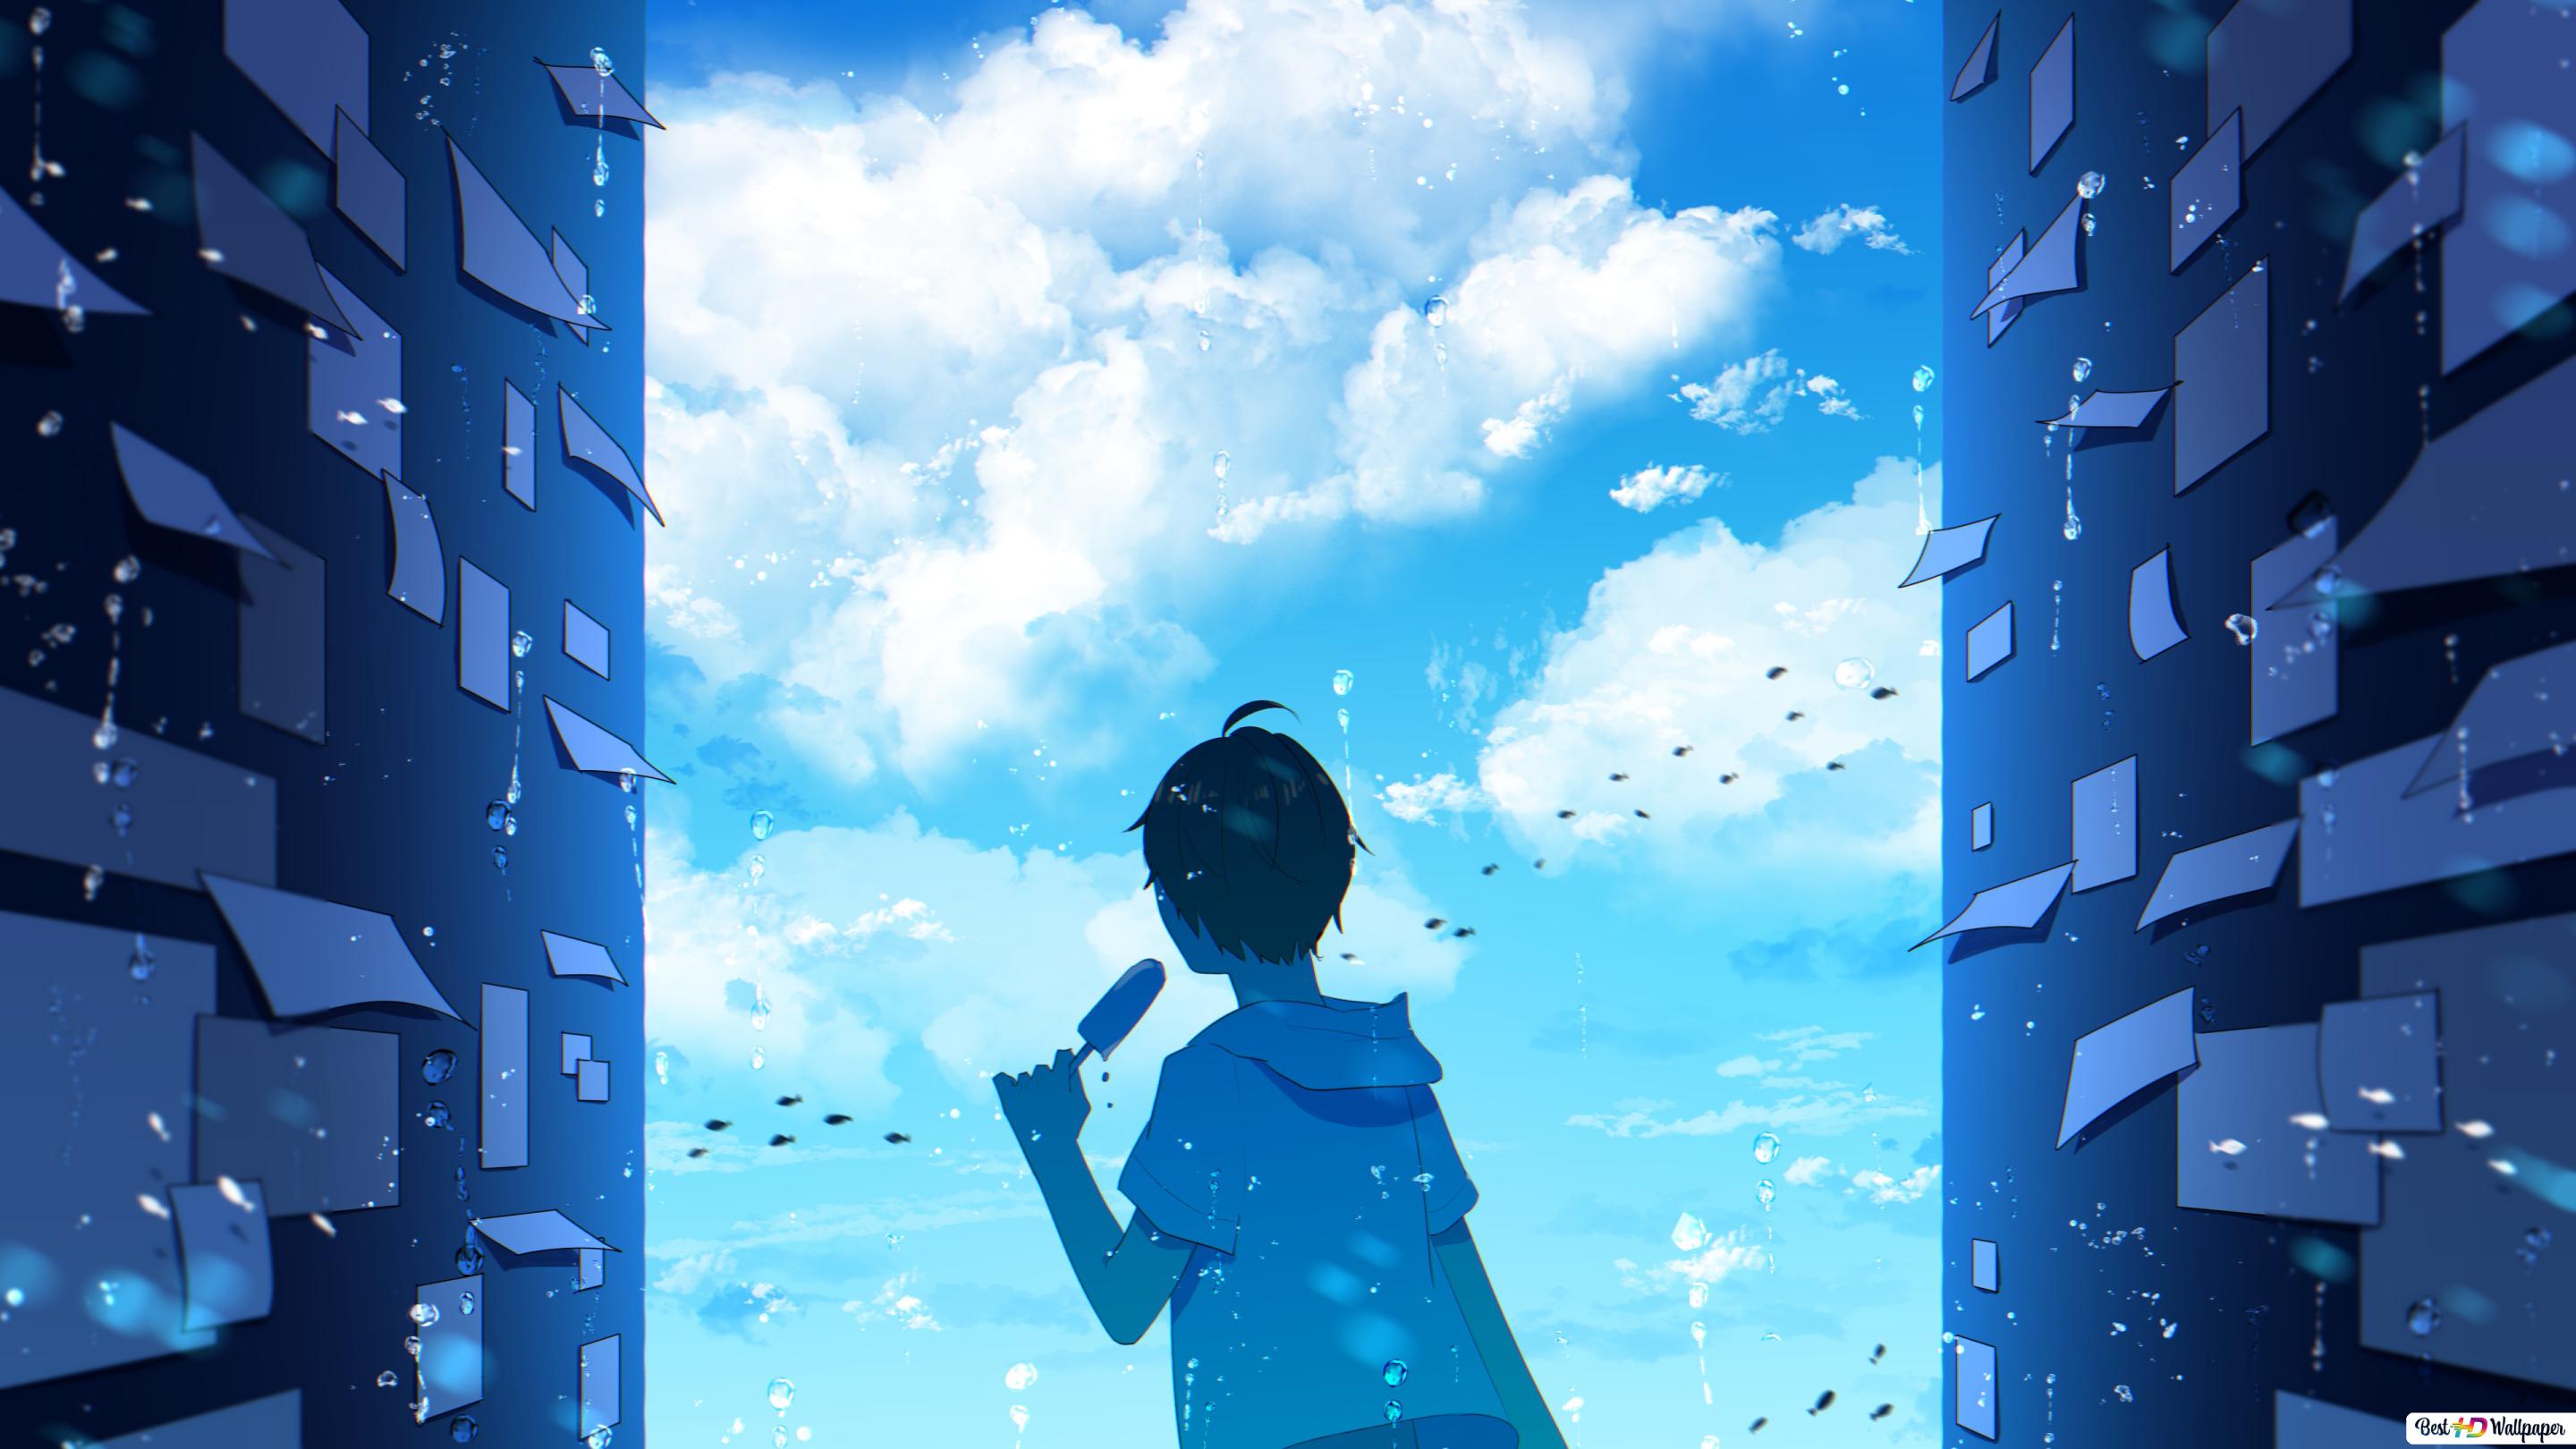 Anime Peaceful Wallpapers